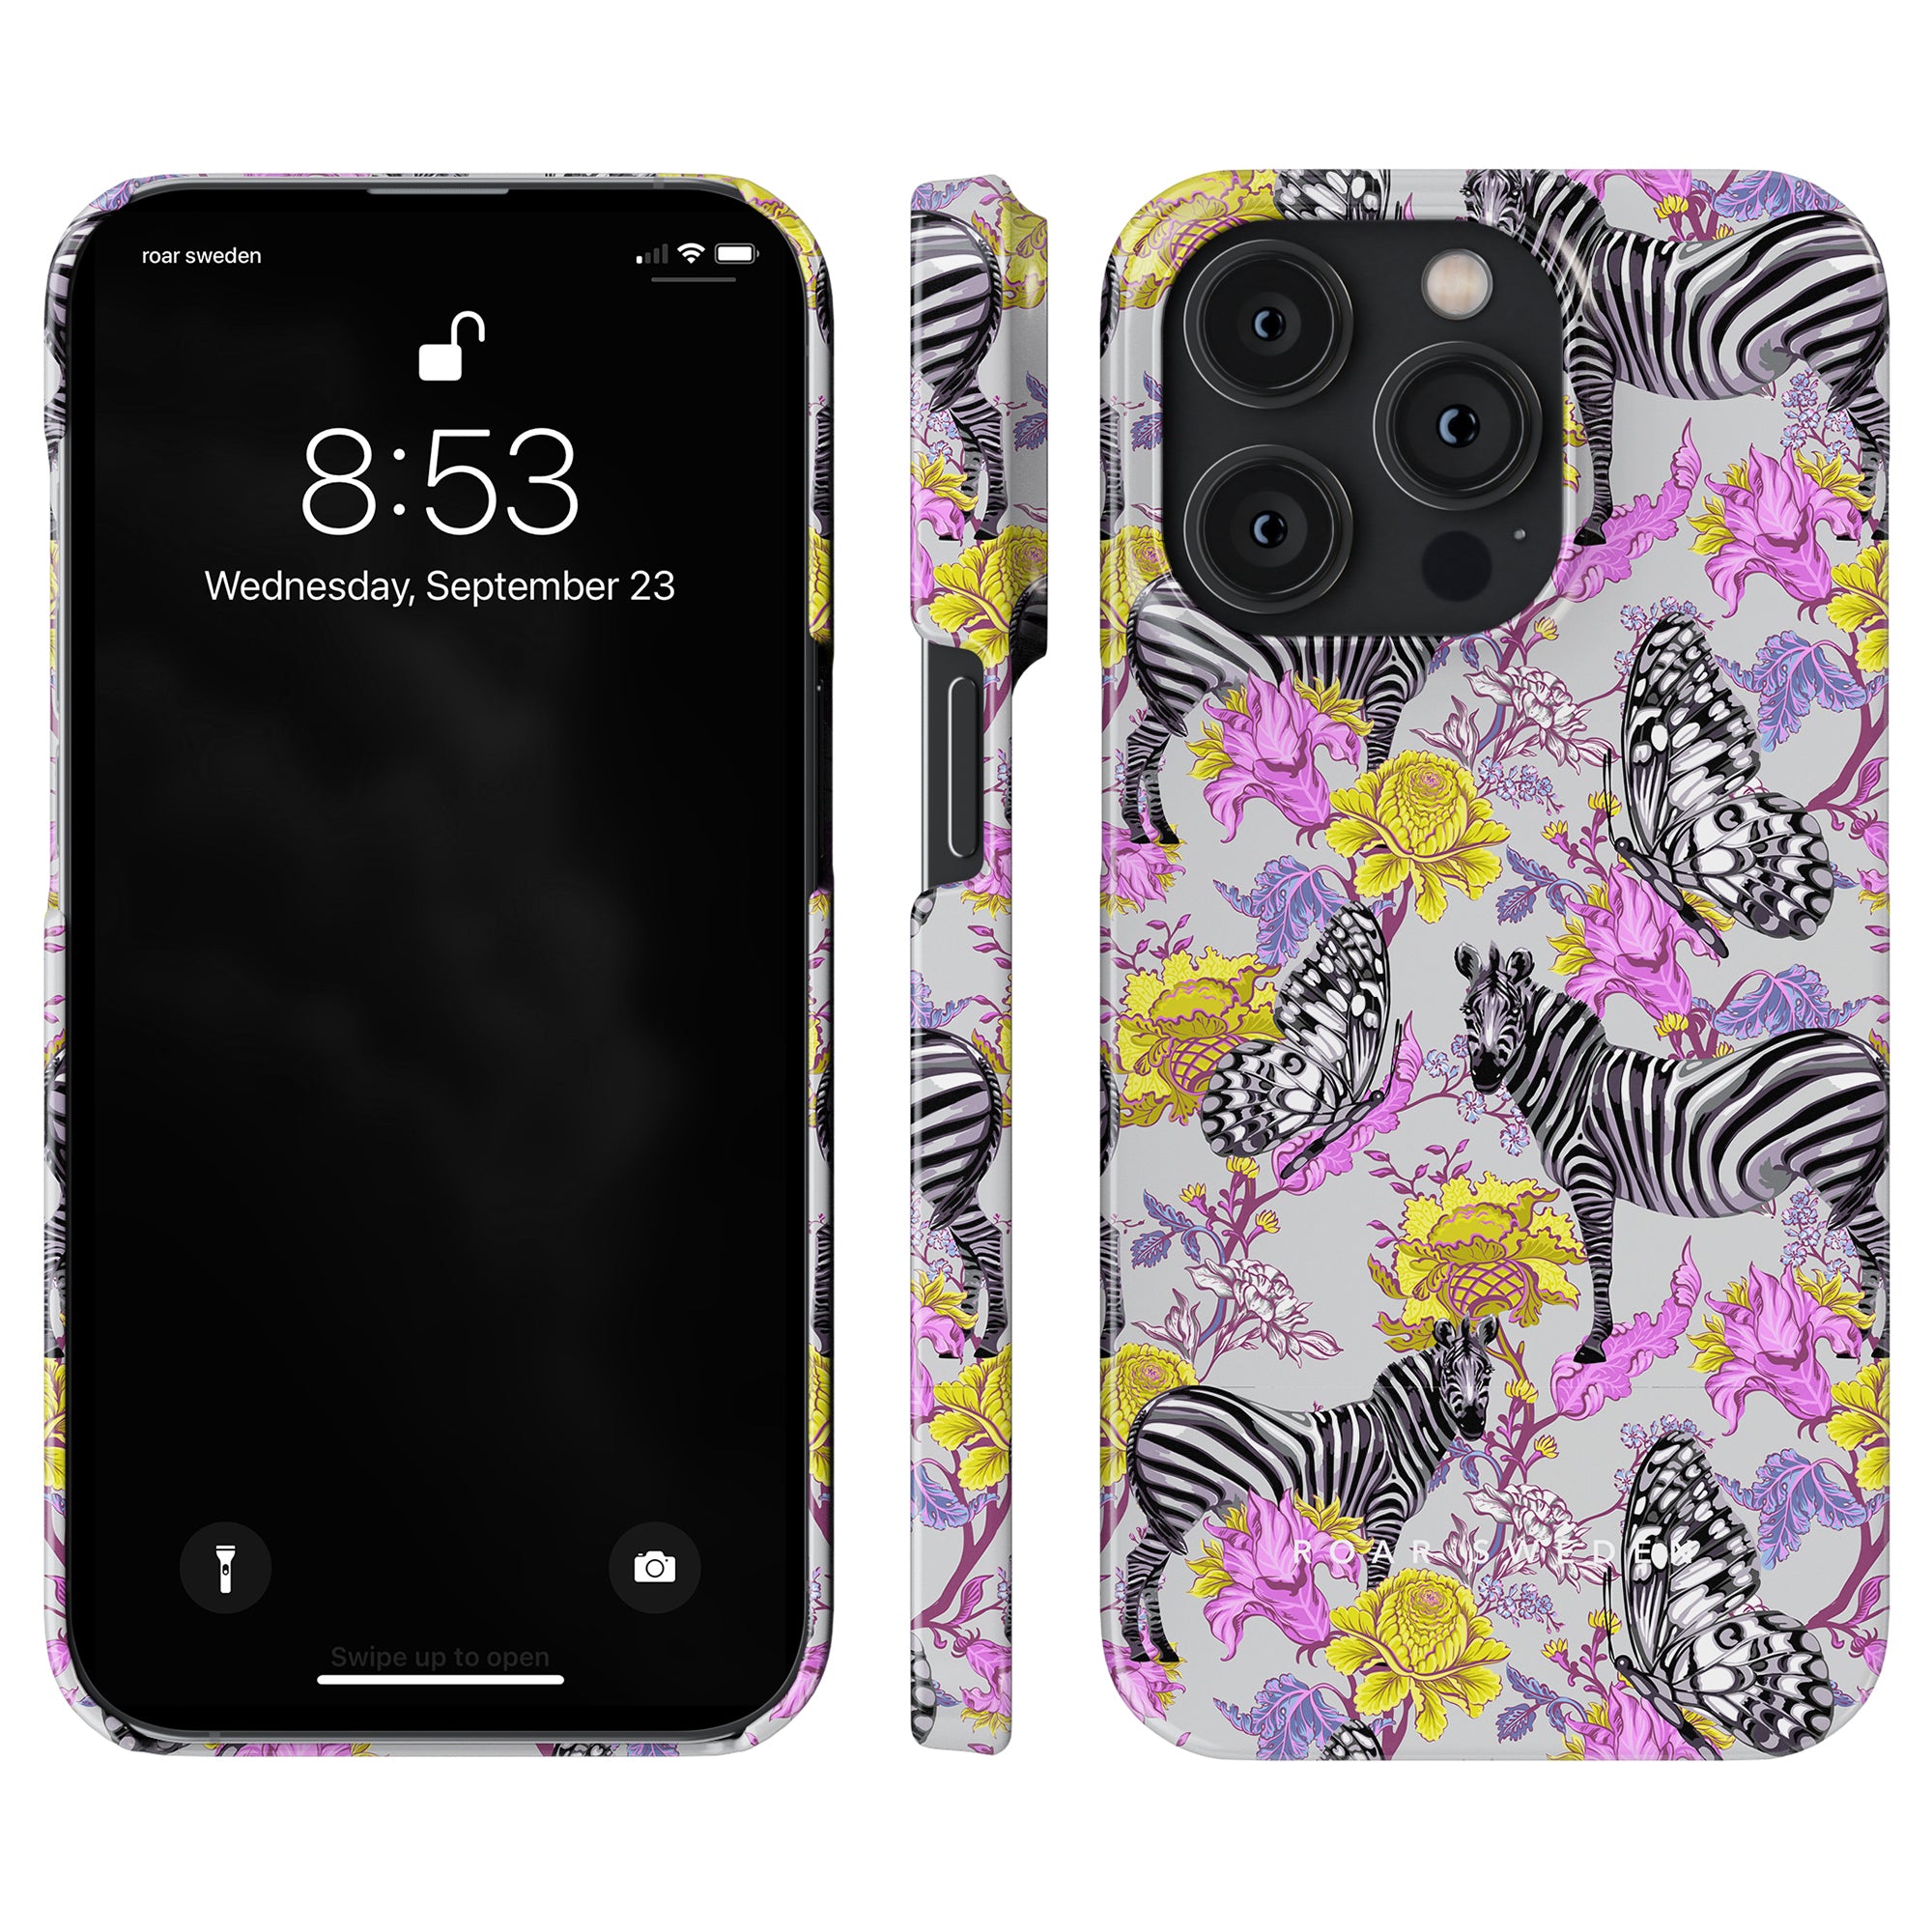 An Exotic Zebra - Slim case for the iPhone 11.